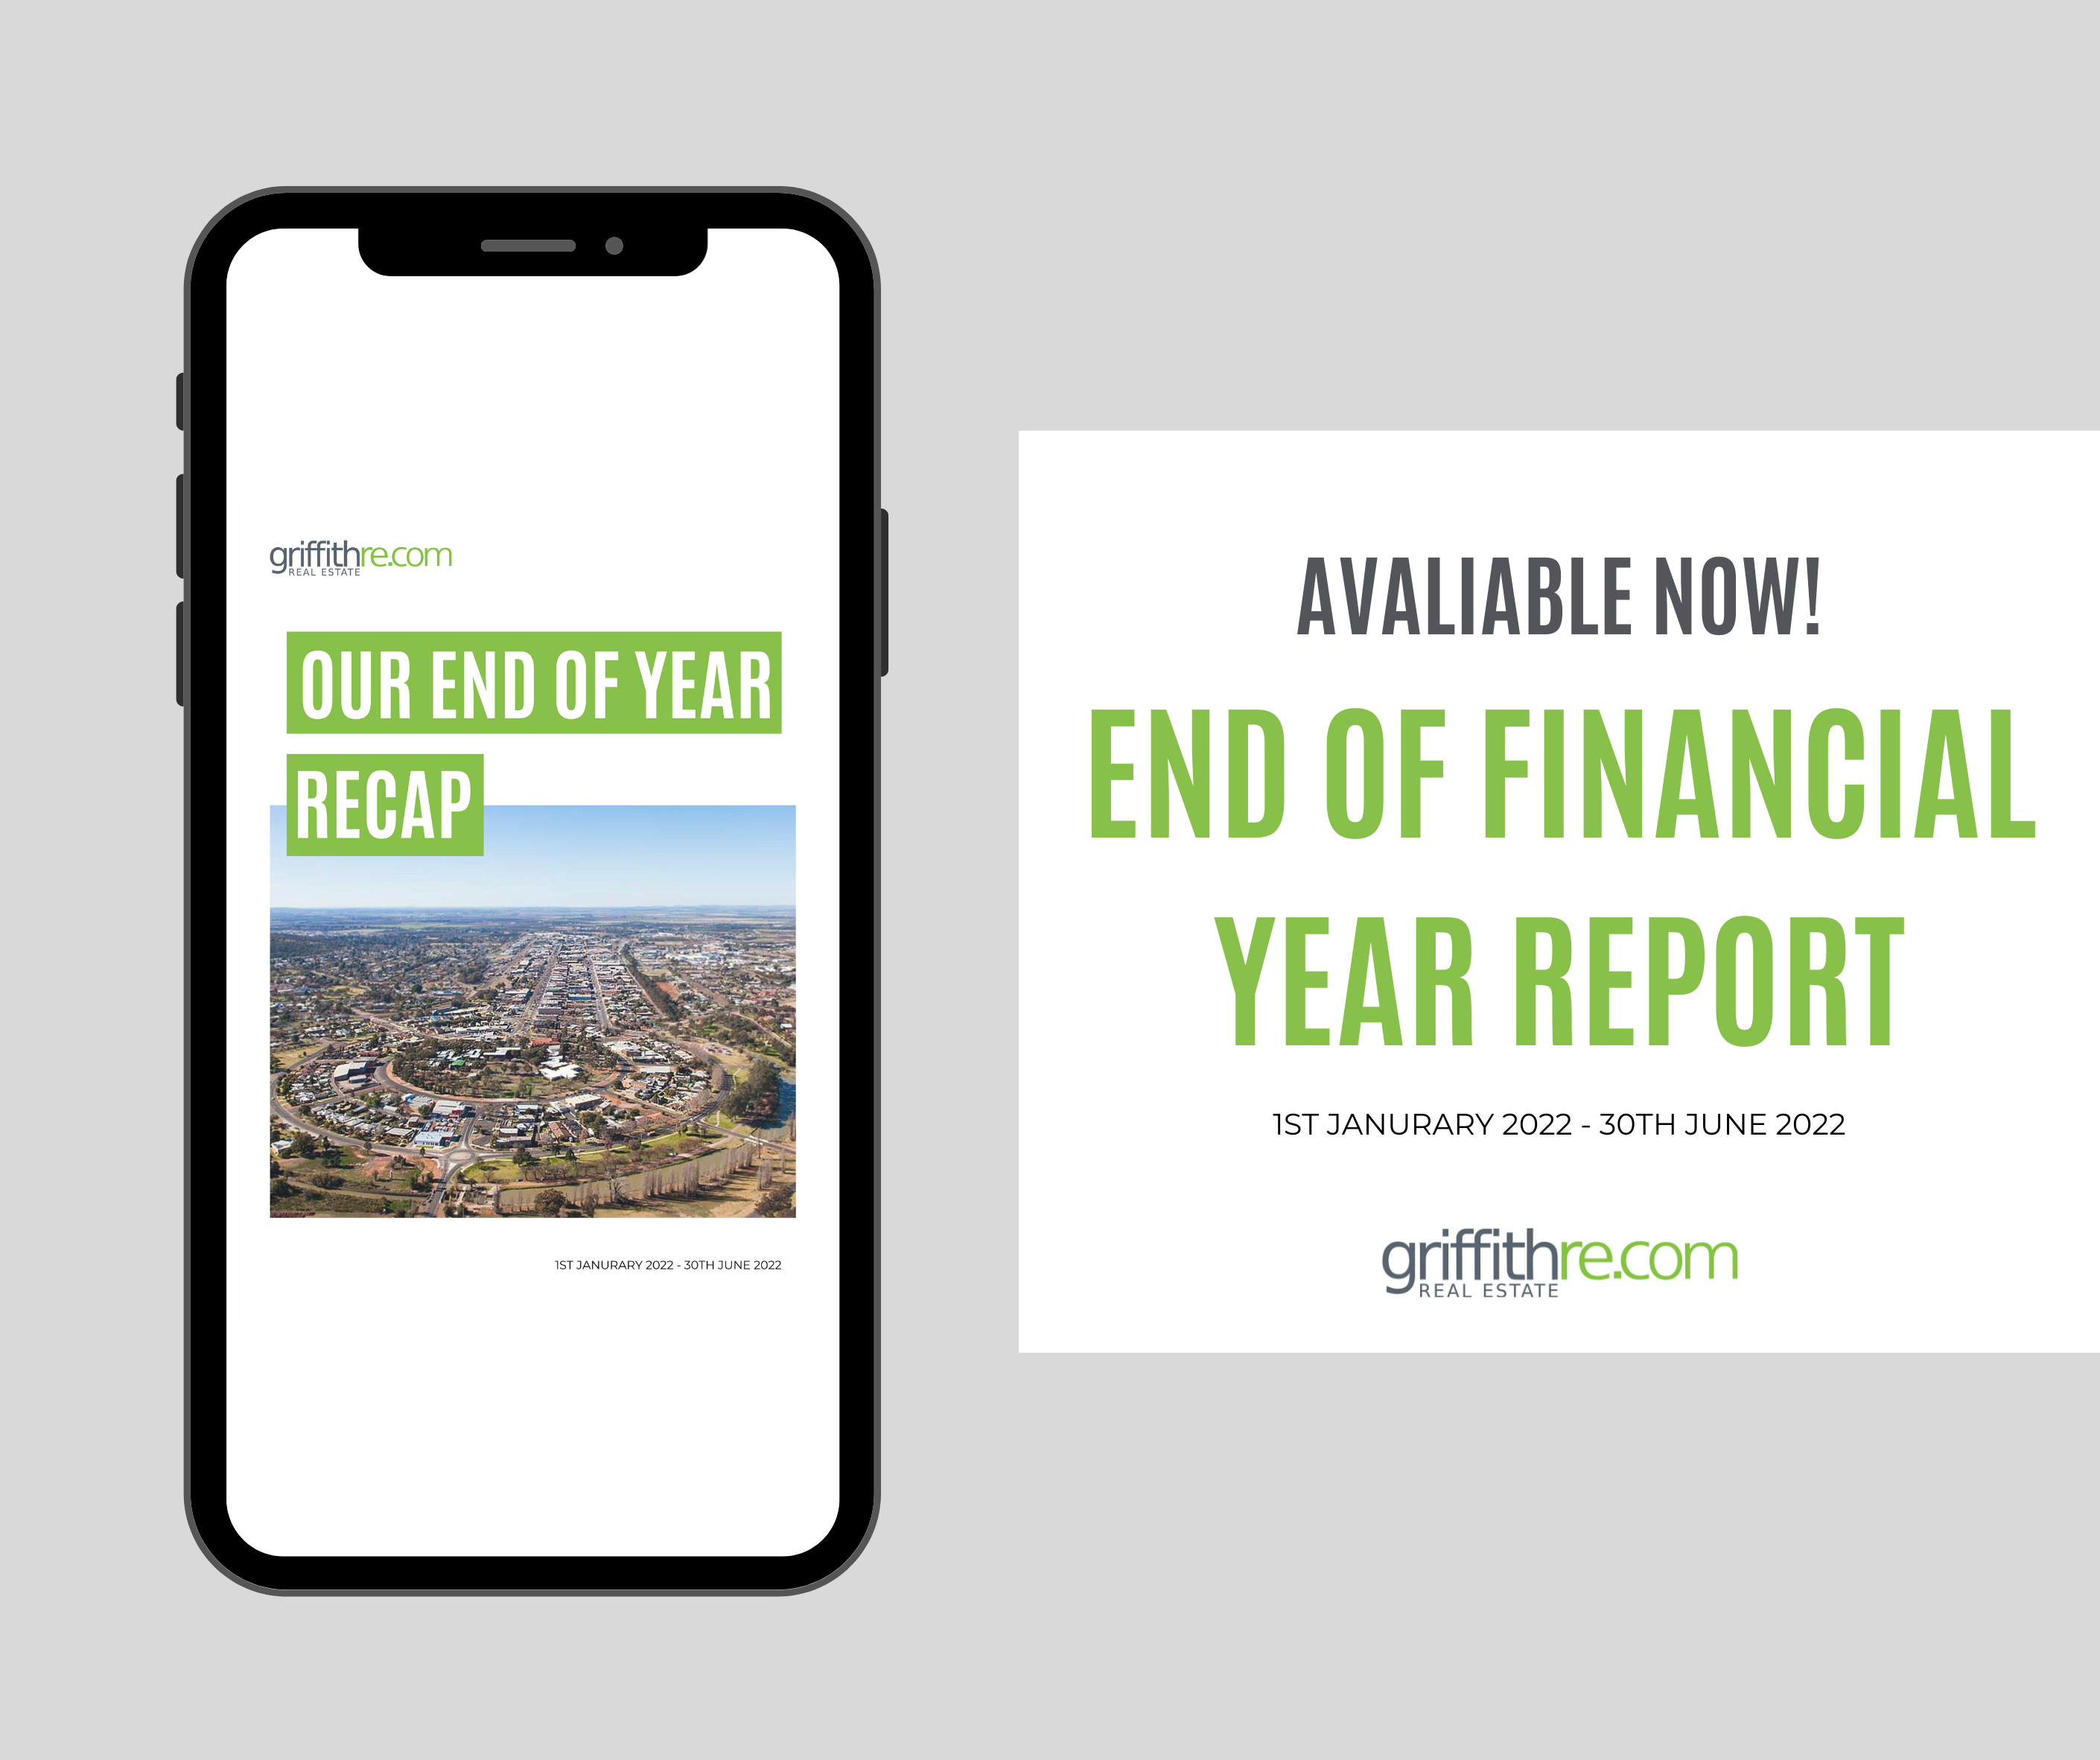 Our End Of Financial Year Recap!